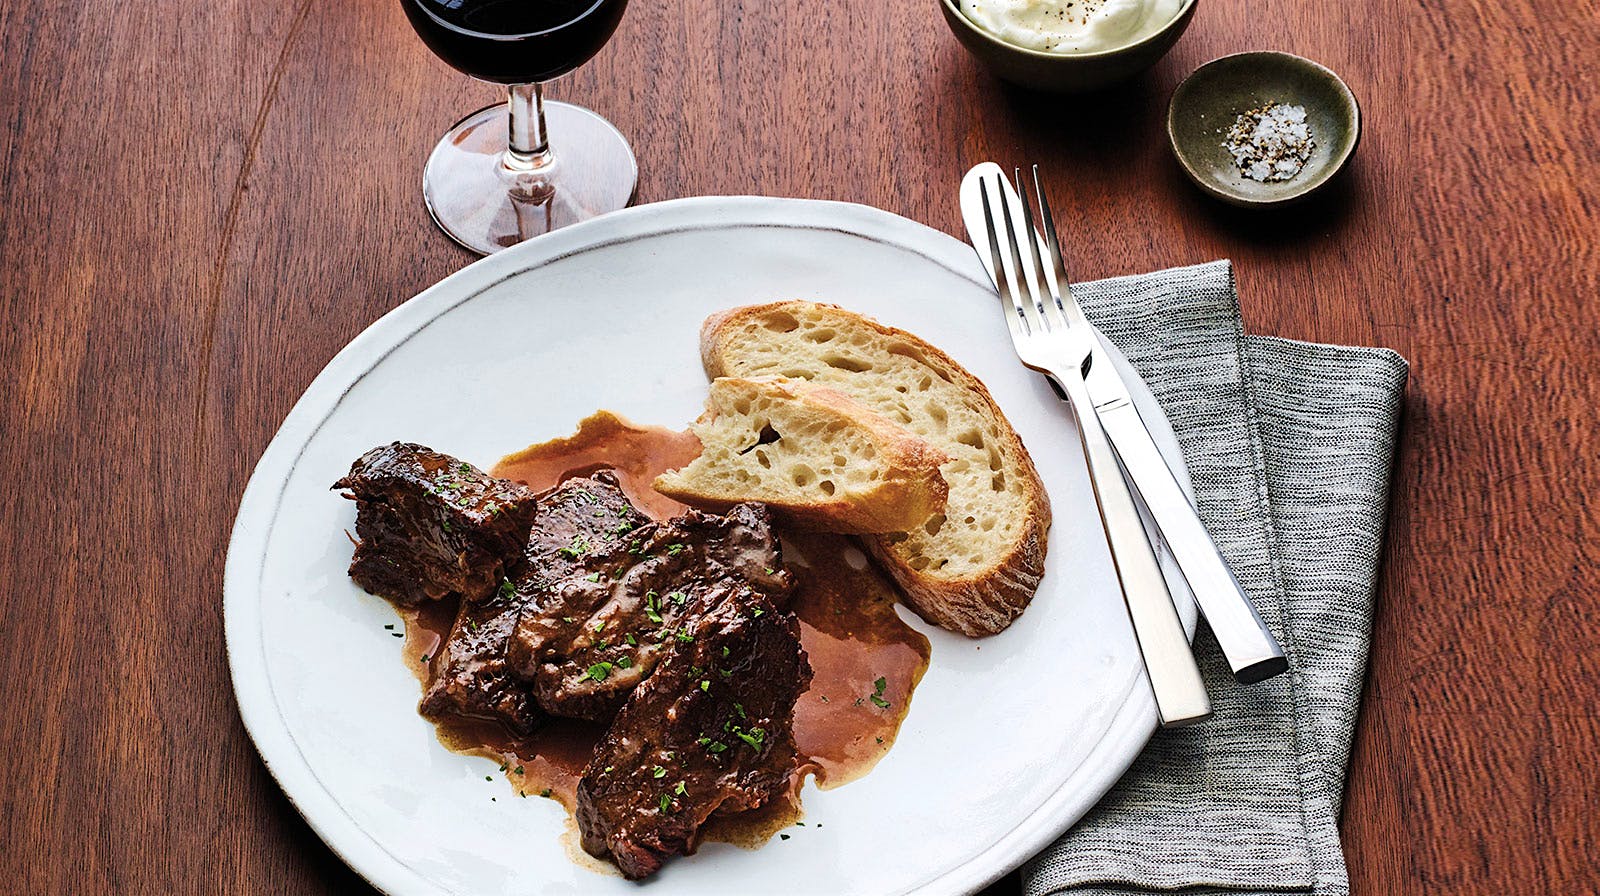 Chef William Bradley's braised short ribs plated with bread and horseradish cream on the side.